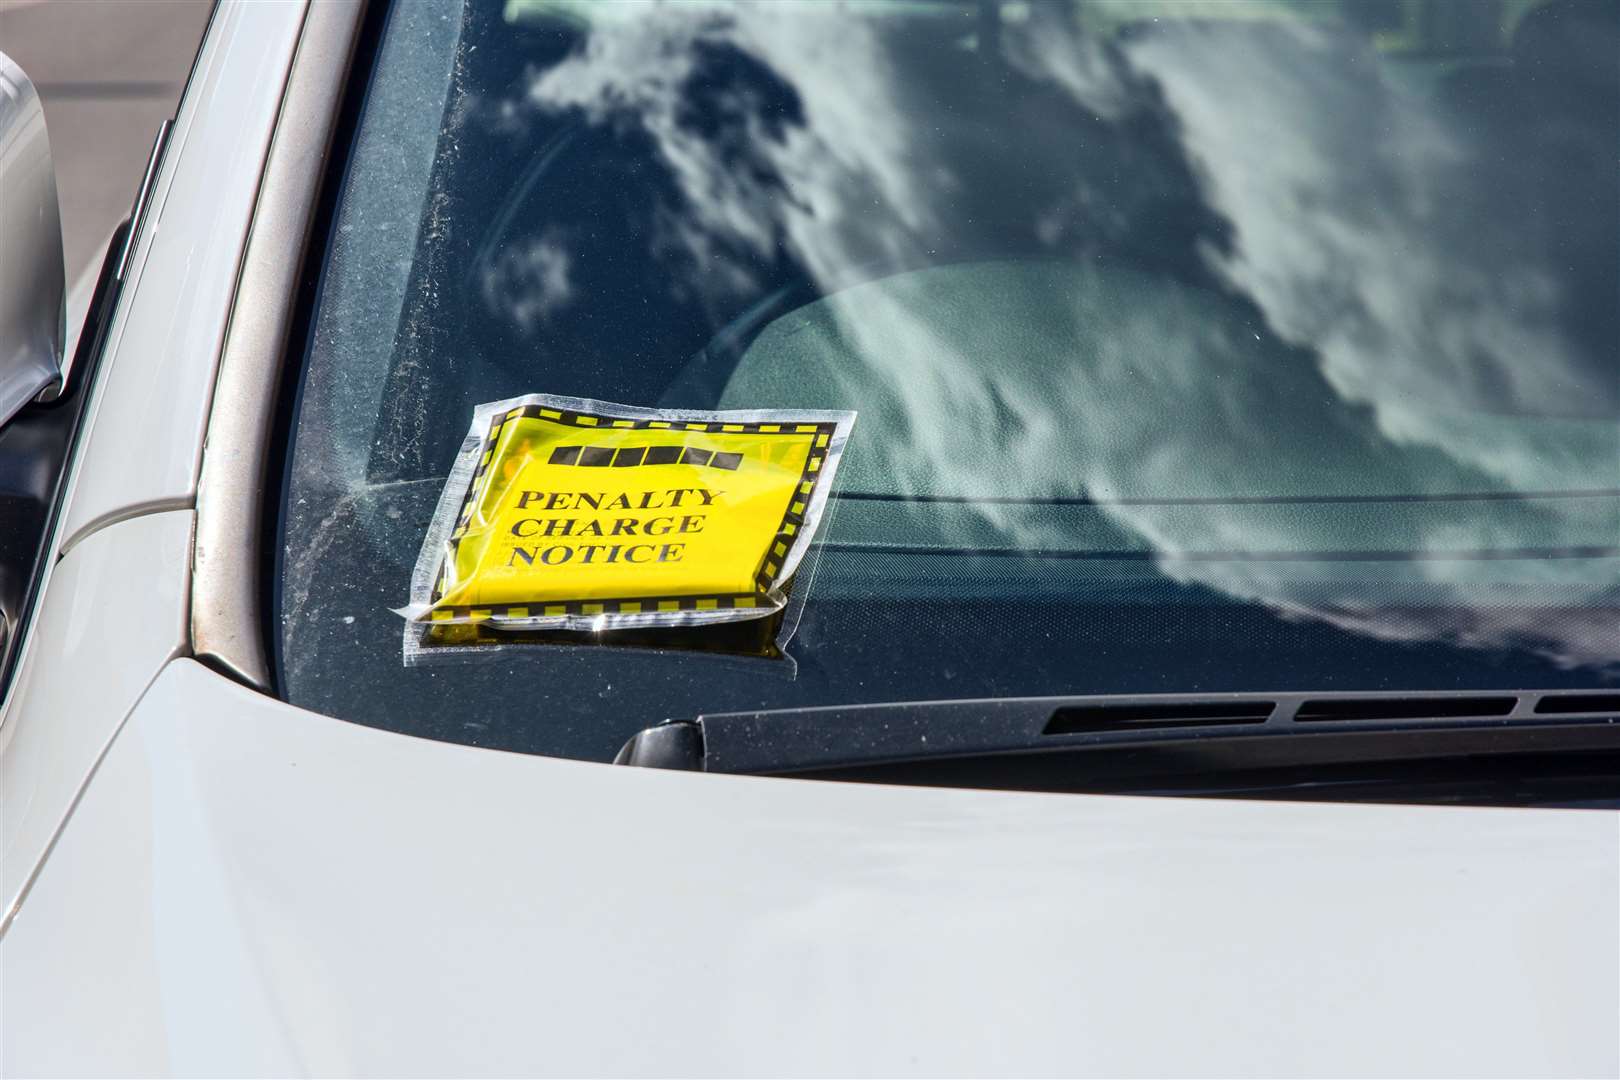 But figures from the council show £1m in parking fines are still unpaid